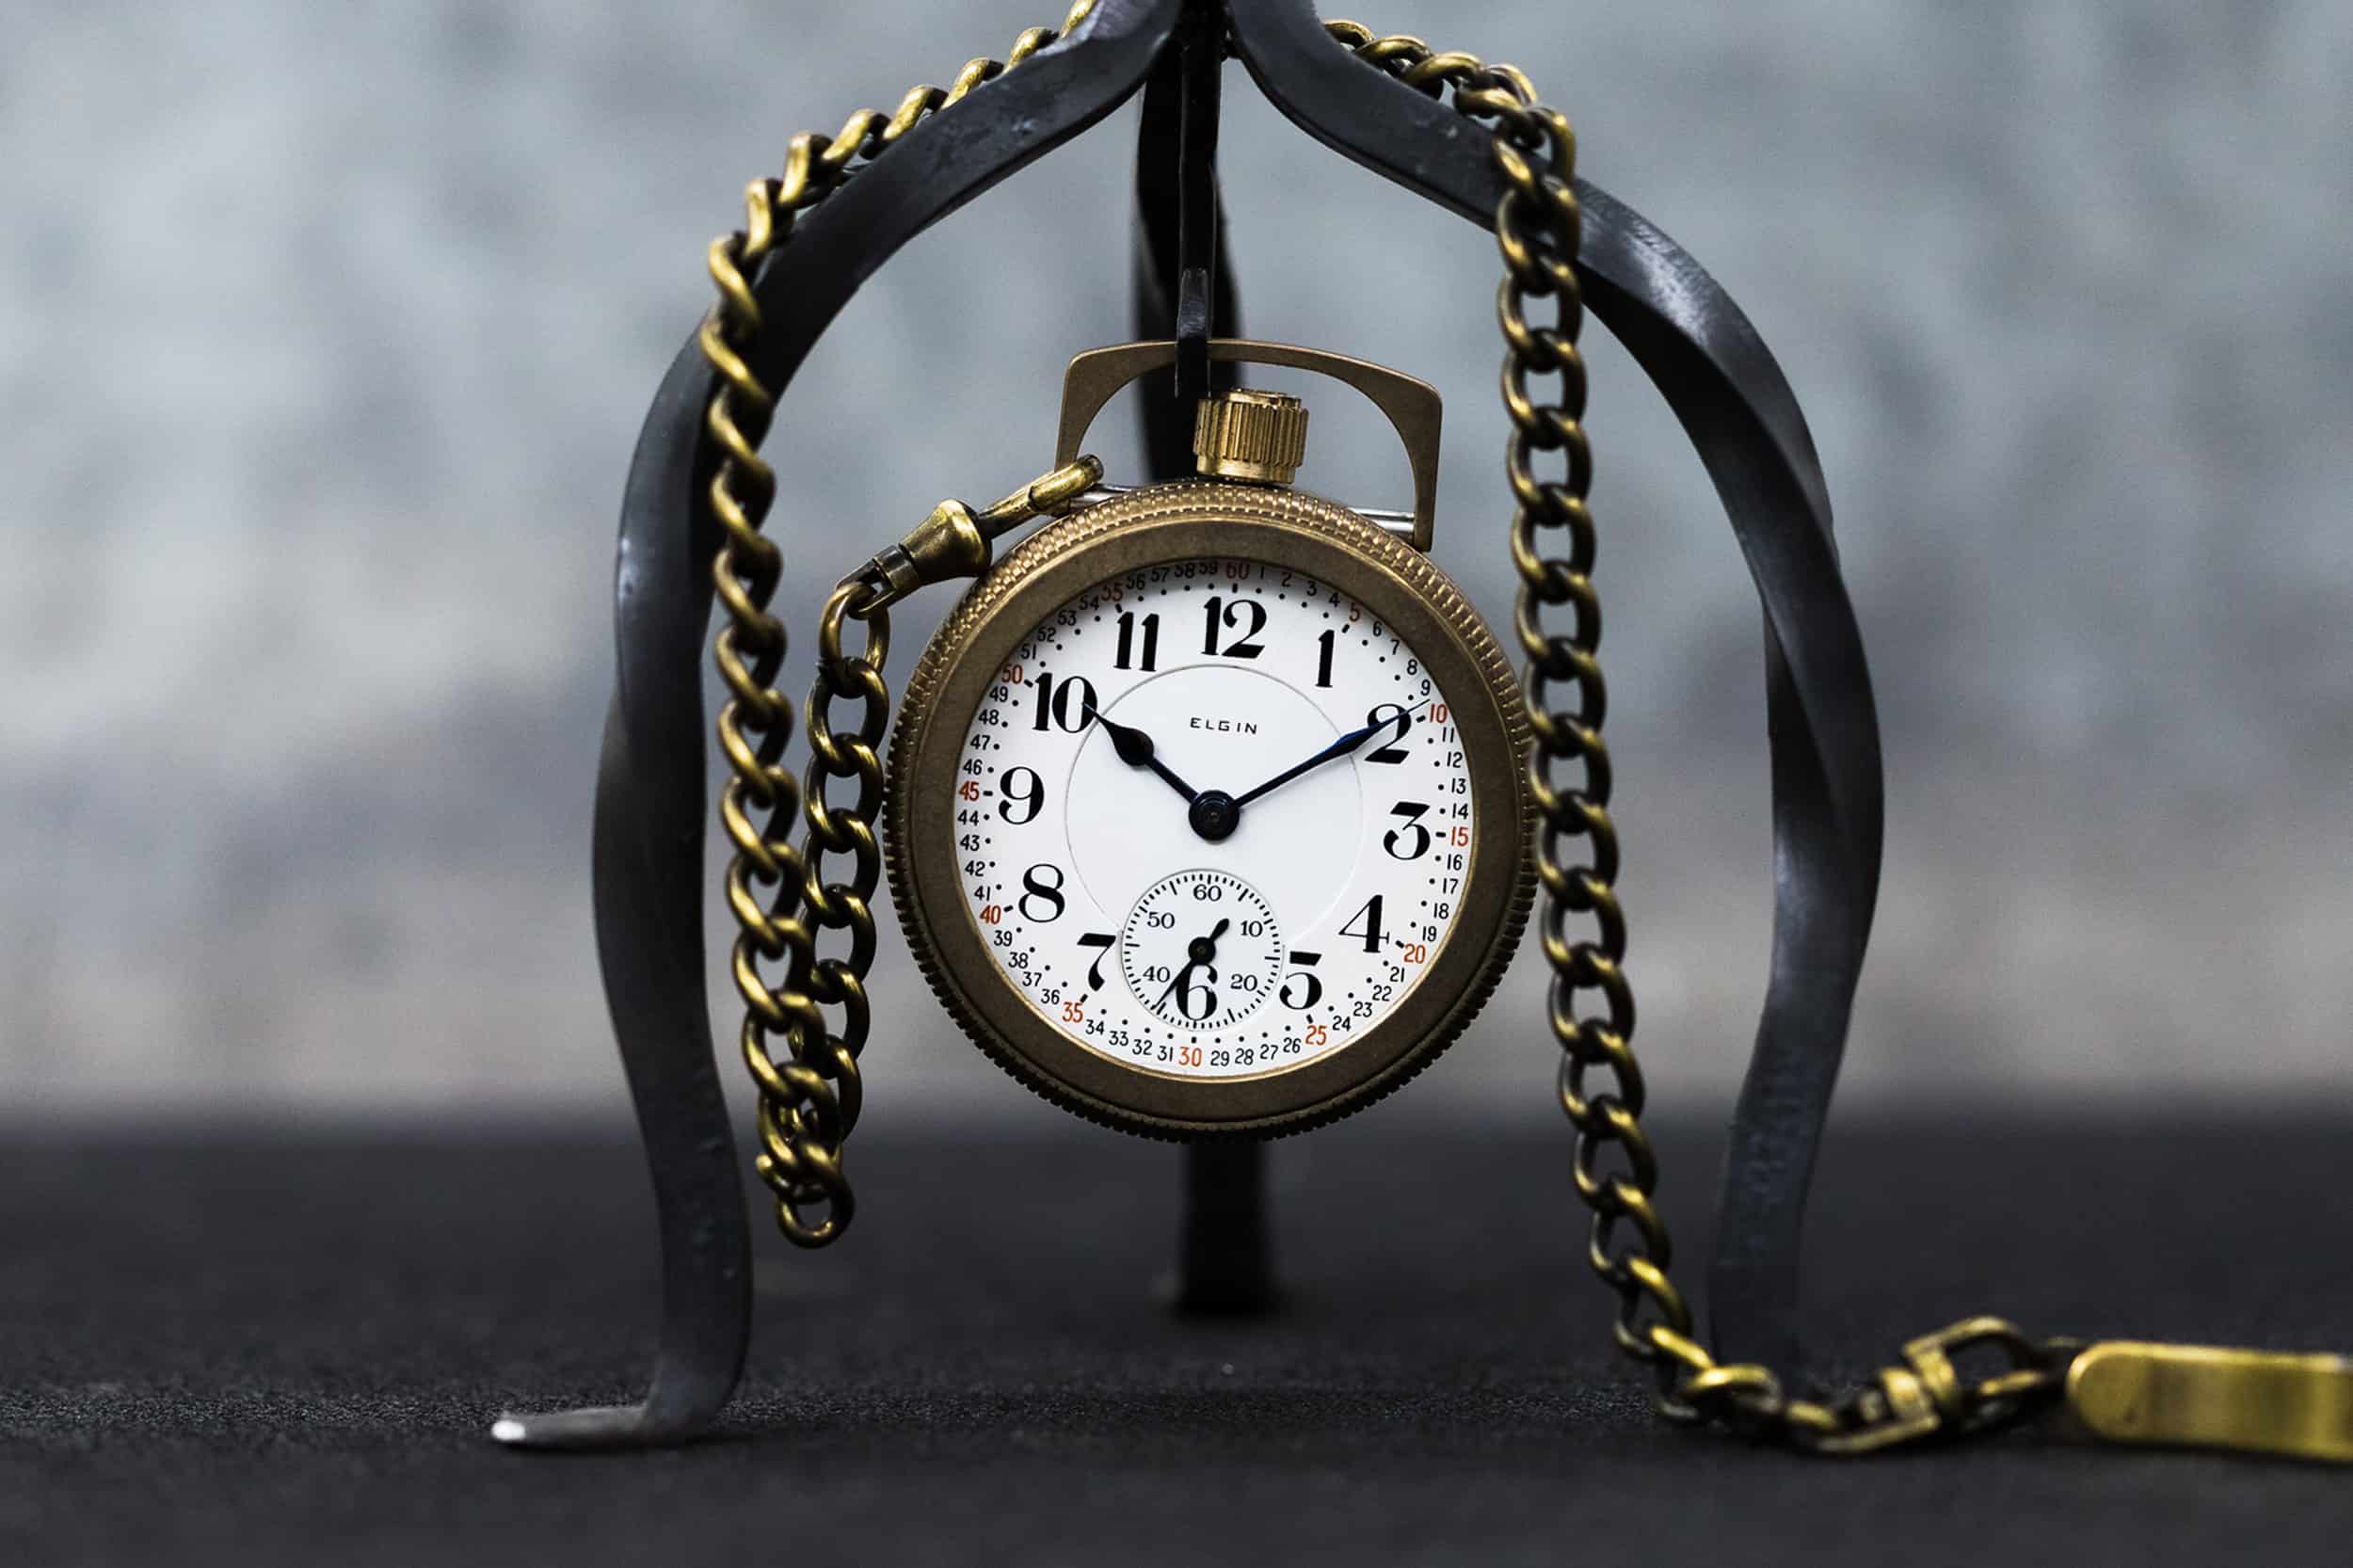 Introducing the First Vortic Pocket Watch – Yes, You Read that Right